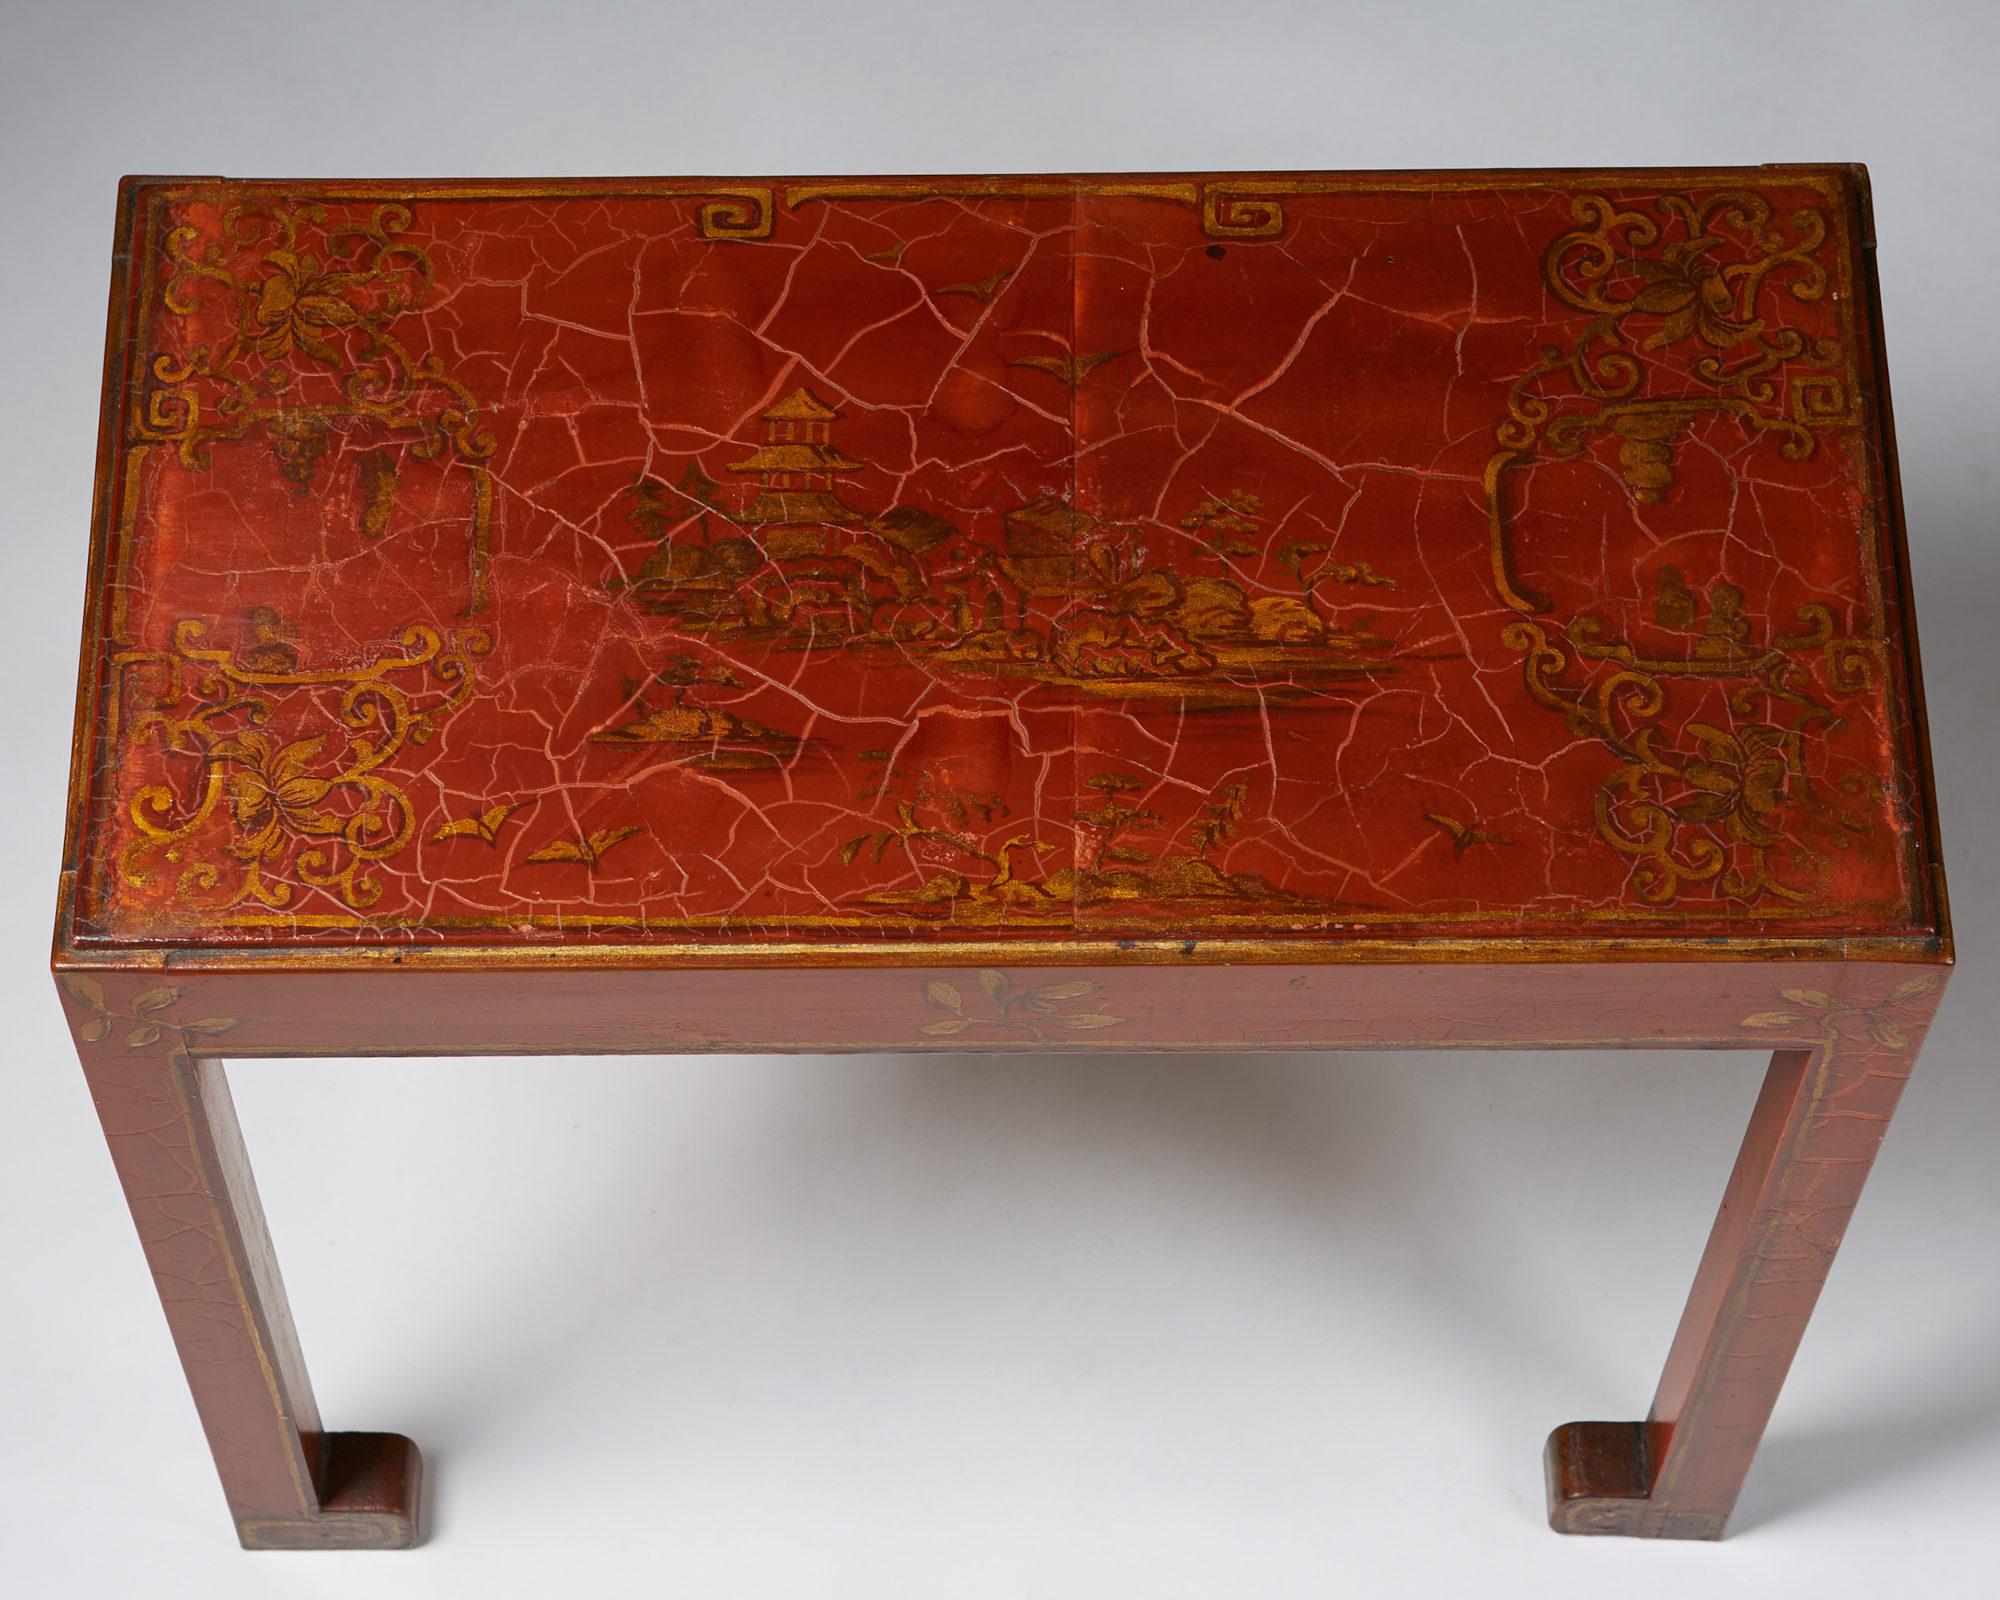 Hand-Painted Occasional Table Designed by Carin Nilsson, Sweden, 1930s